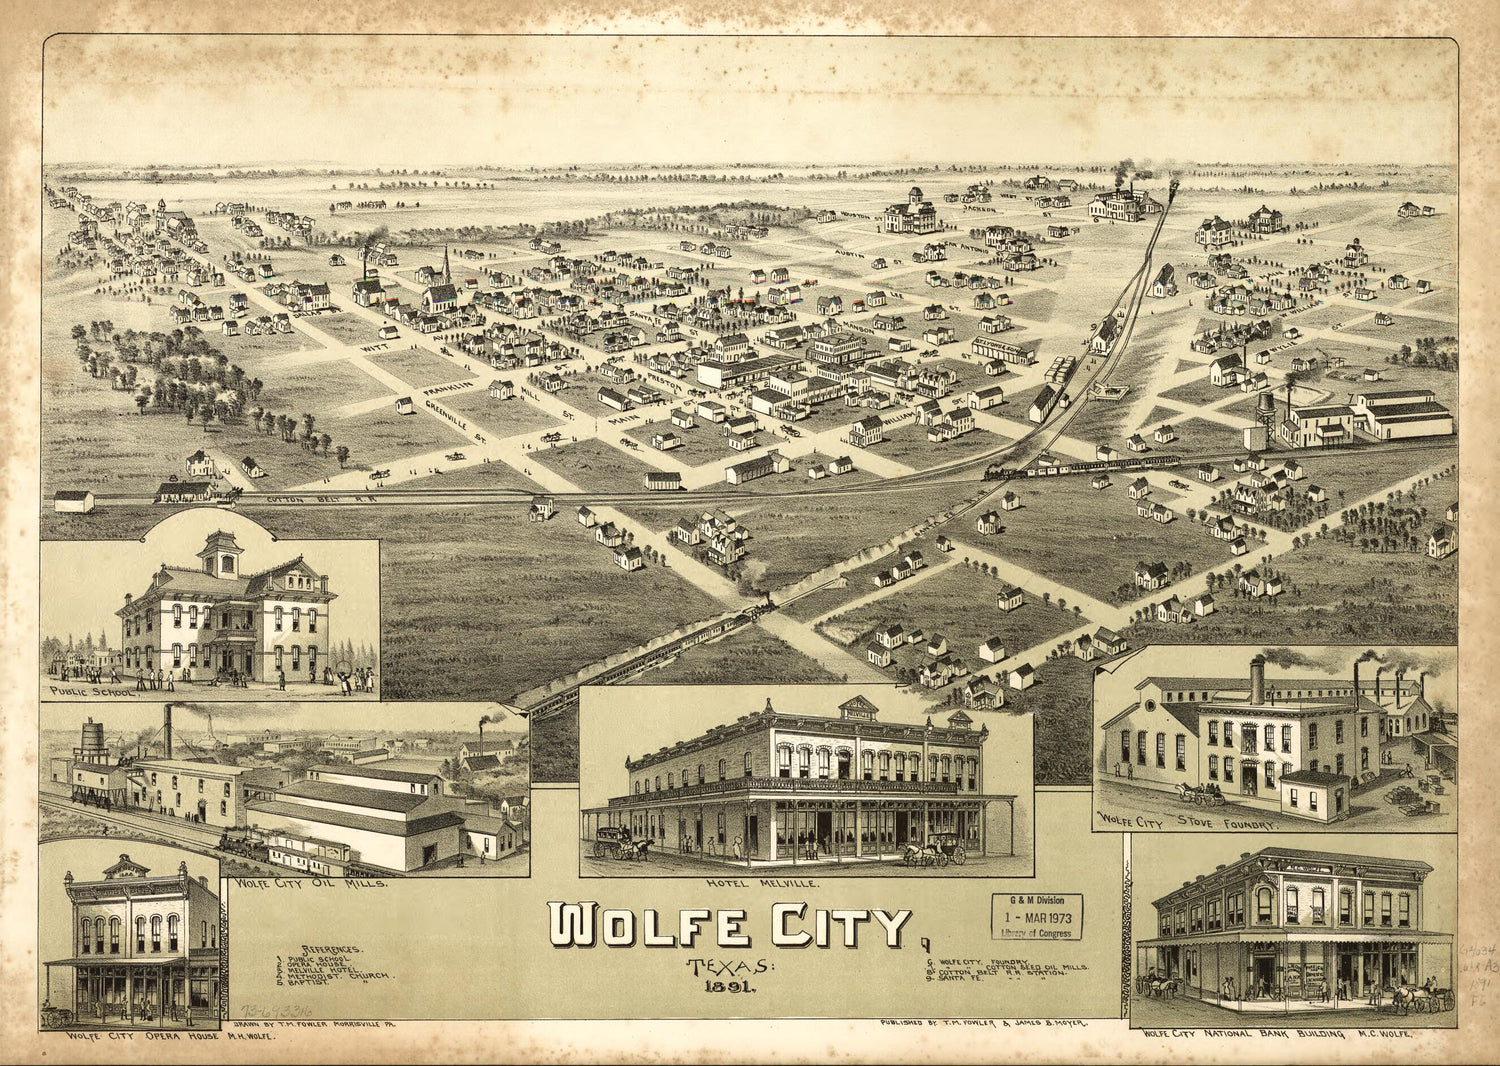 This old map of Wolfe City, Texas from 1891 was created by T. M. (Thaddeus Mortimer) Fowler, James B. Moyer in 1891